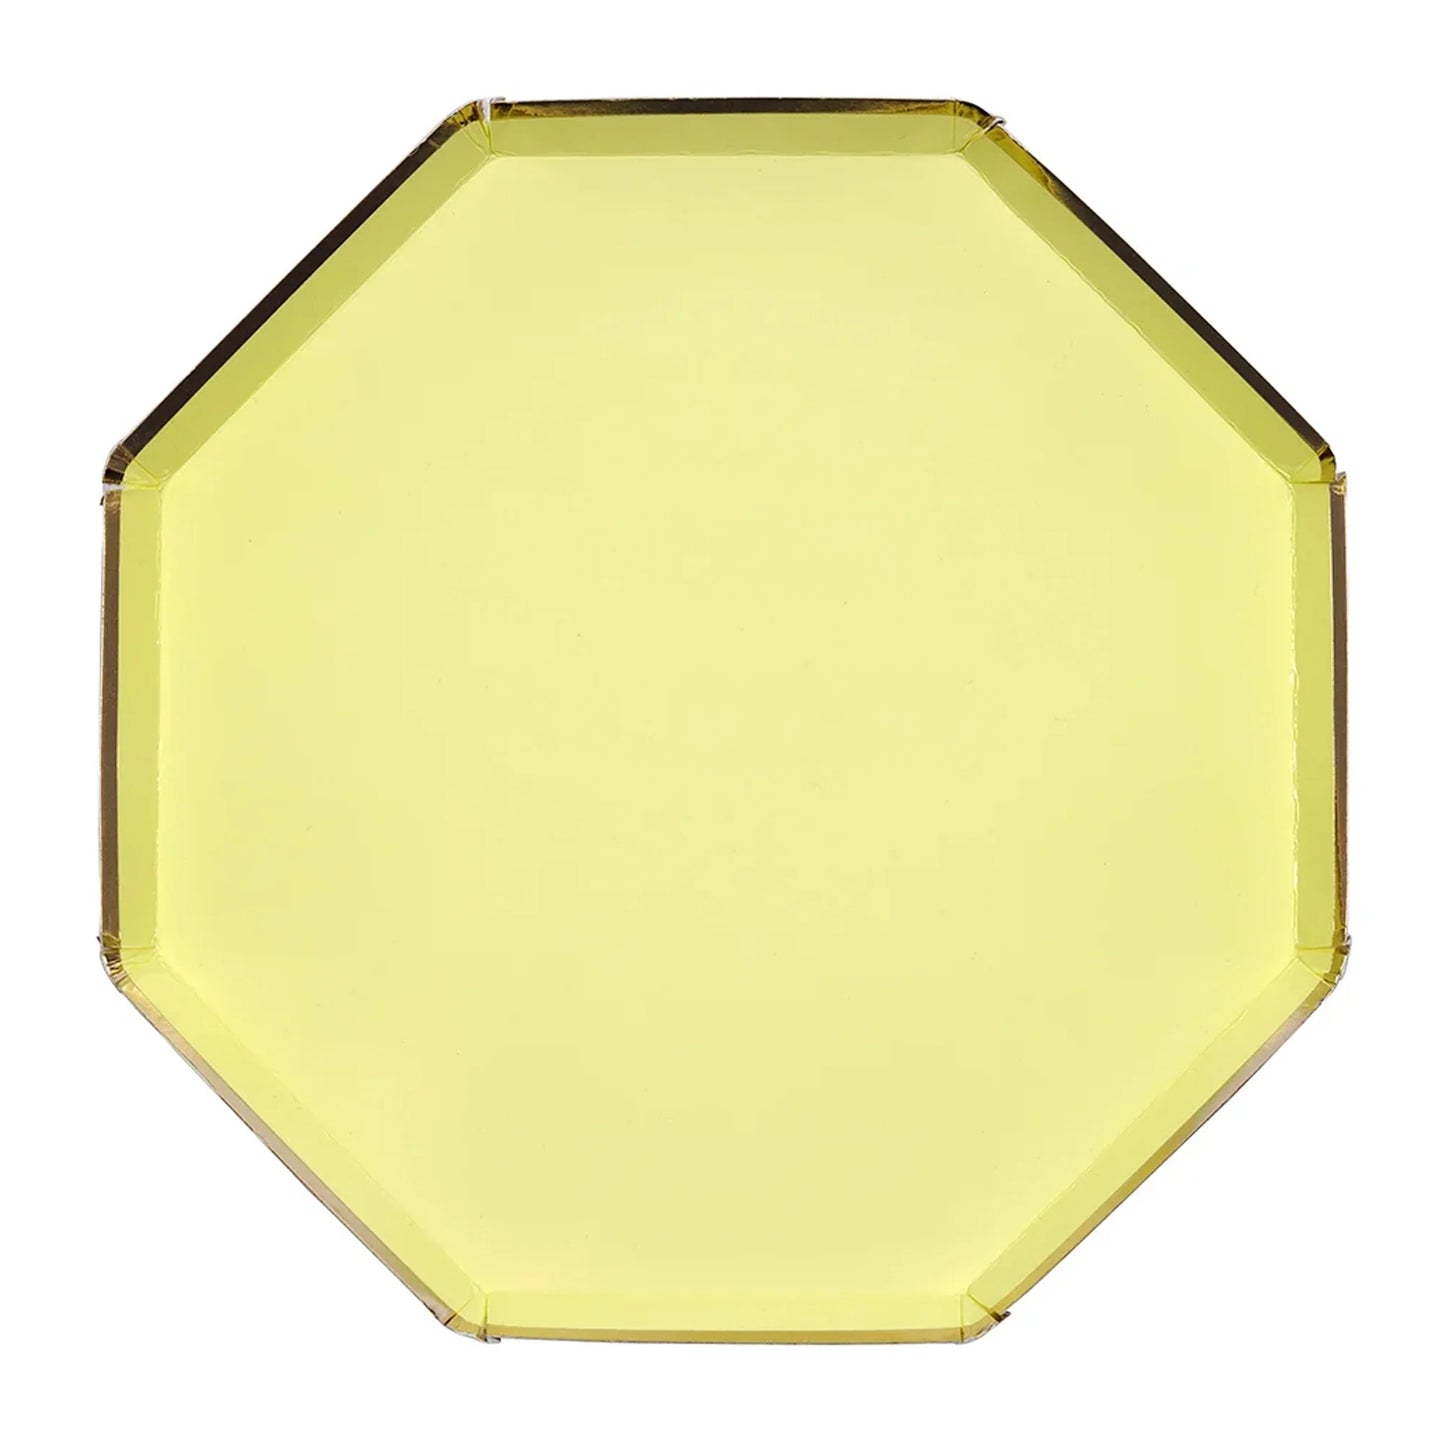 PALE YELLOW LARGE PLATES